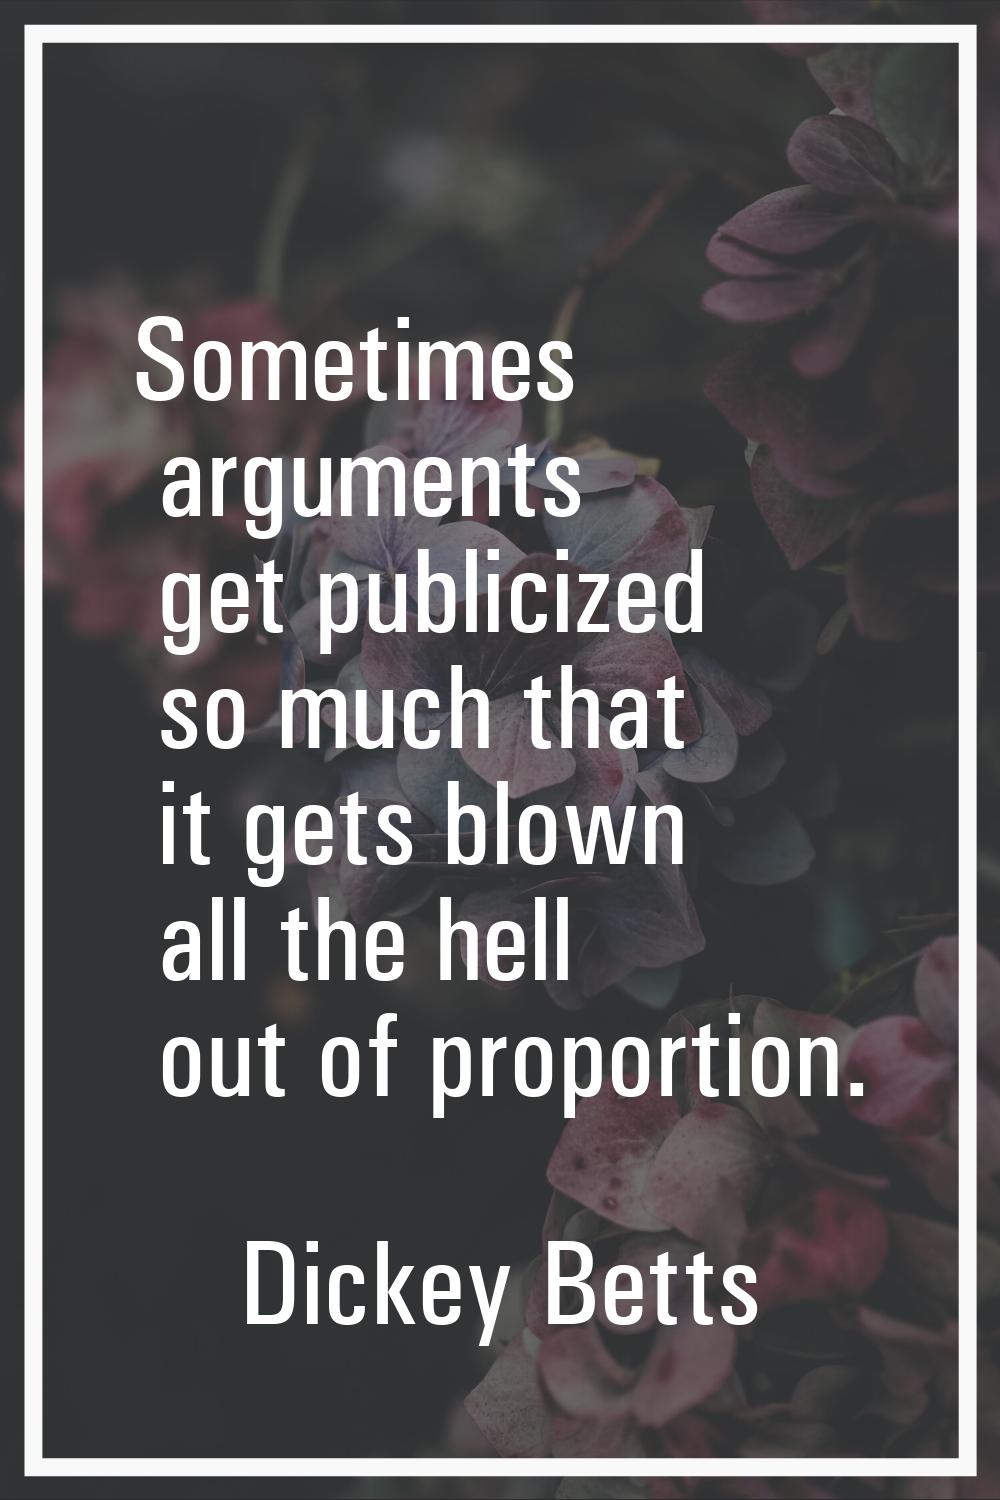 Sometimes arguments get publicized so much that it gets blown all the hell out of proportion.